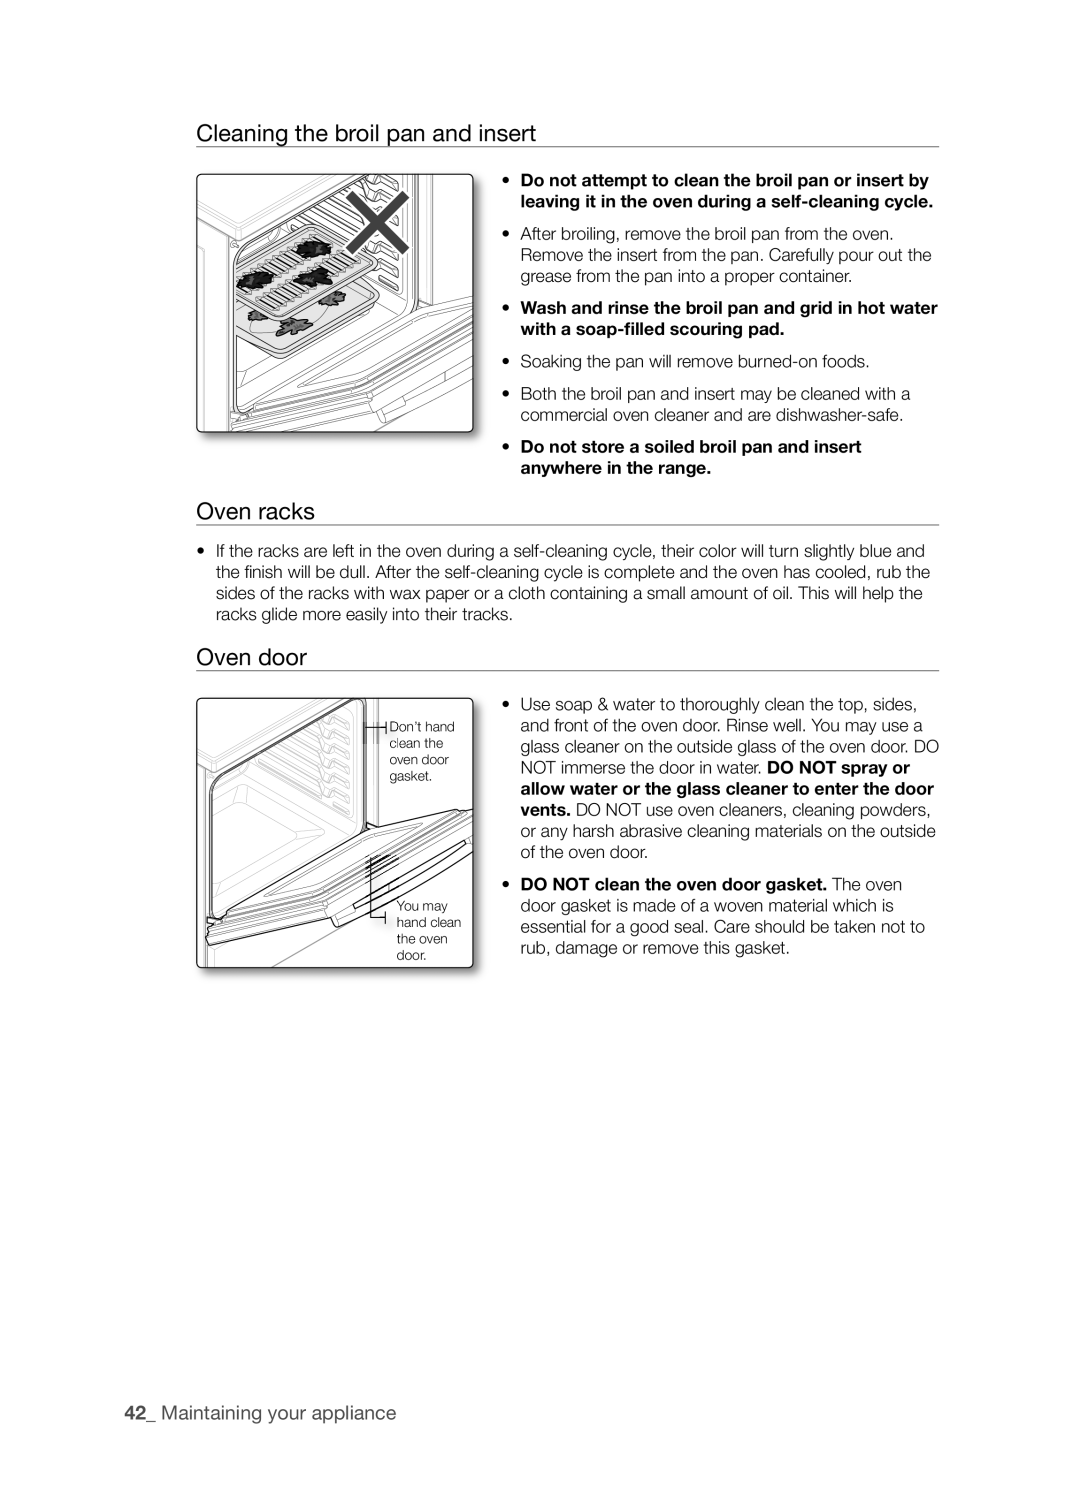 Samsung FTQ352IWX user manual Cleaning the broil pan and insert, Oven racks, Oven door, 2_ Maintaining your appliance 